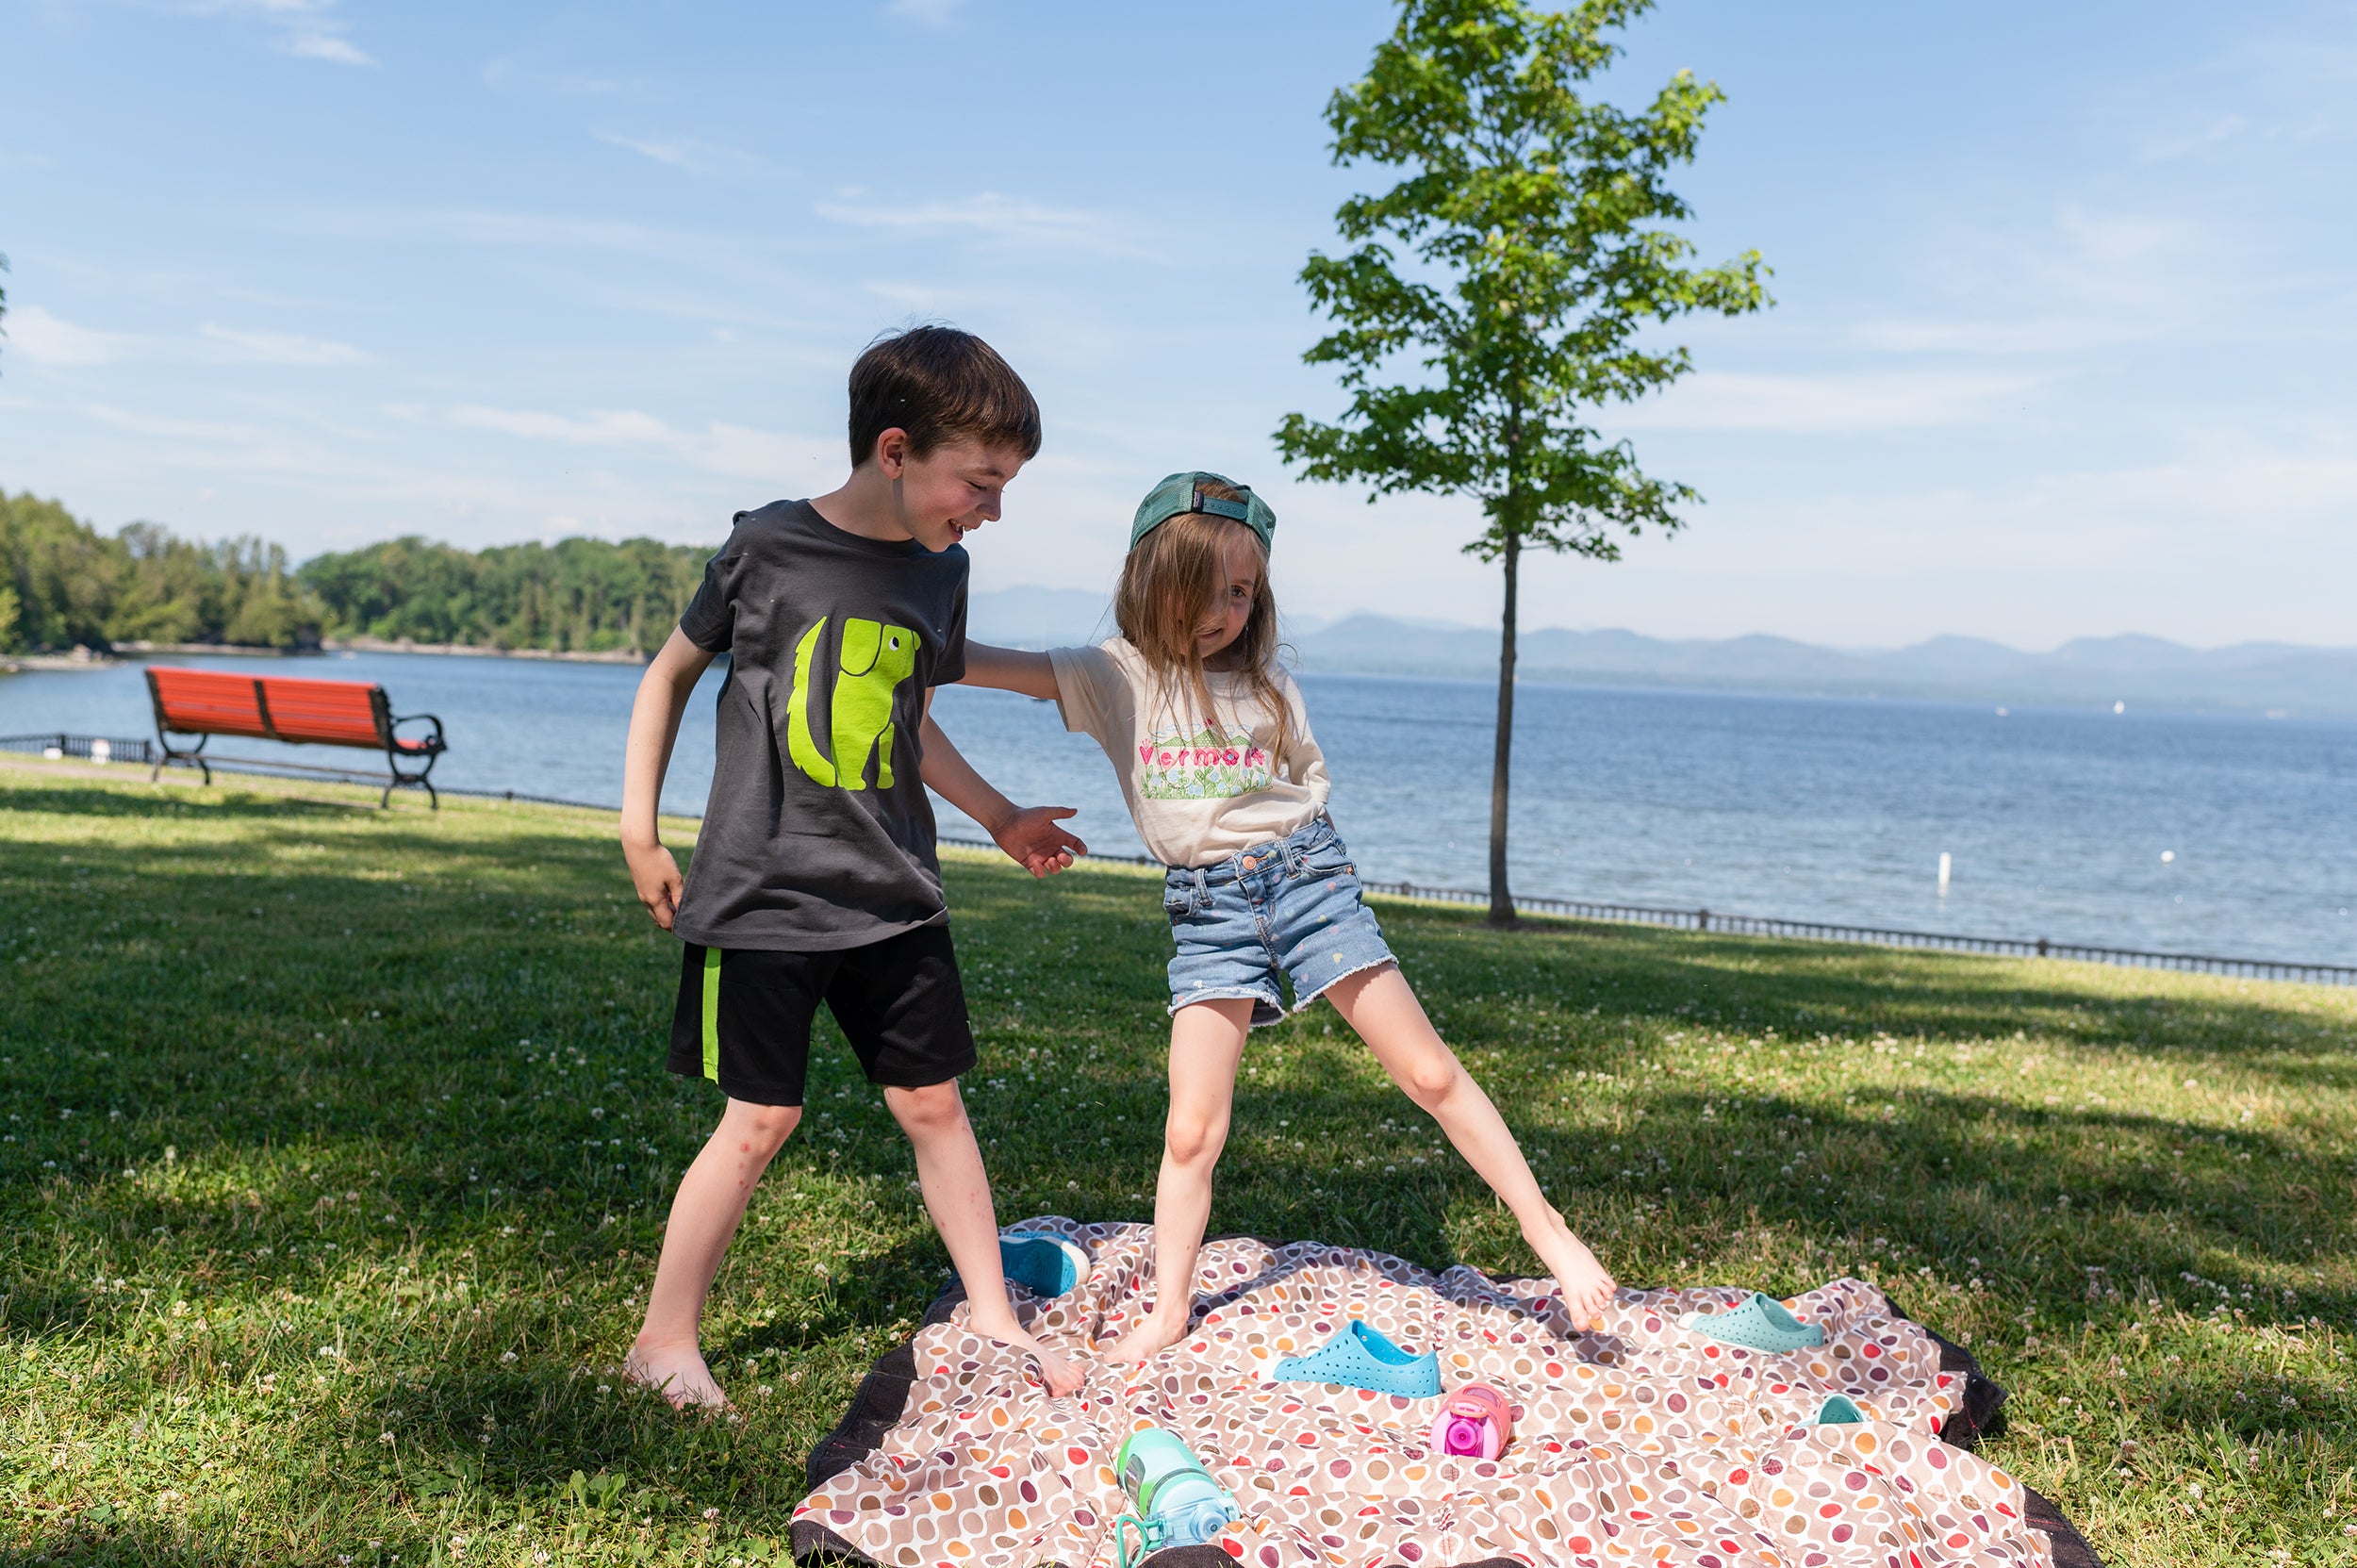 Two kids in Vermont Eclectic Company shirts playing in the grass along side Lake Champlain